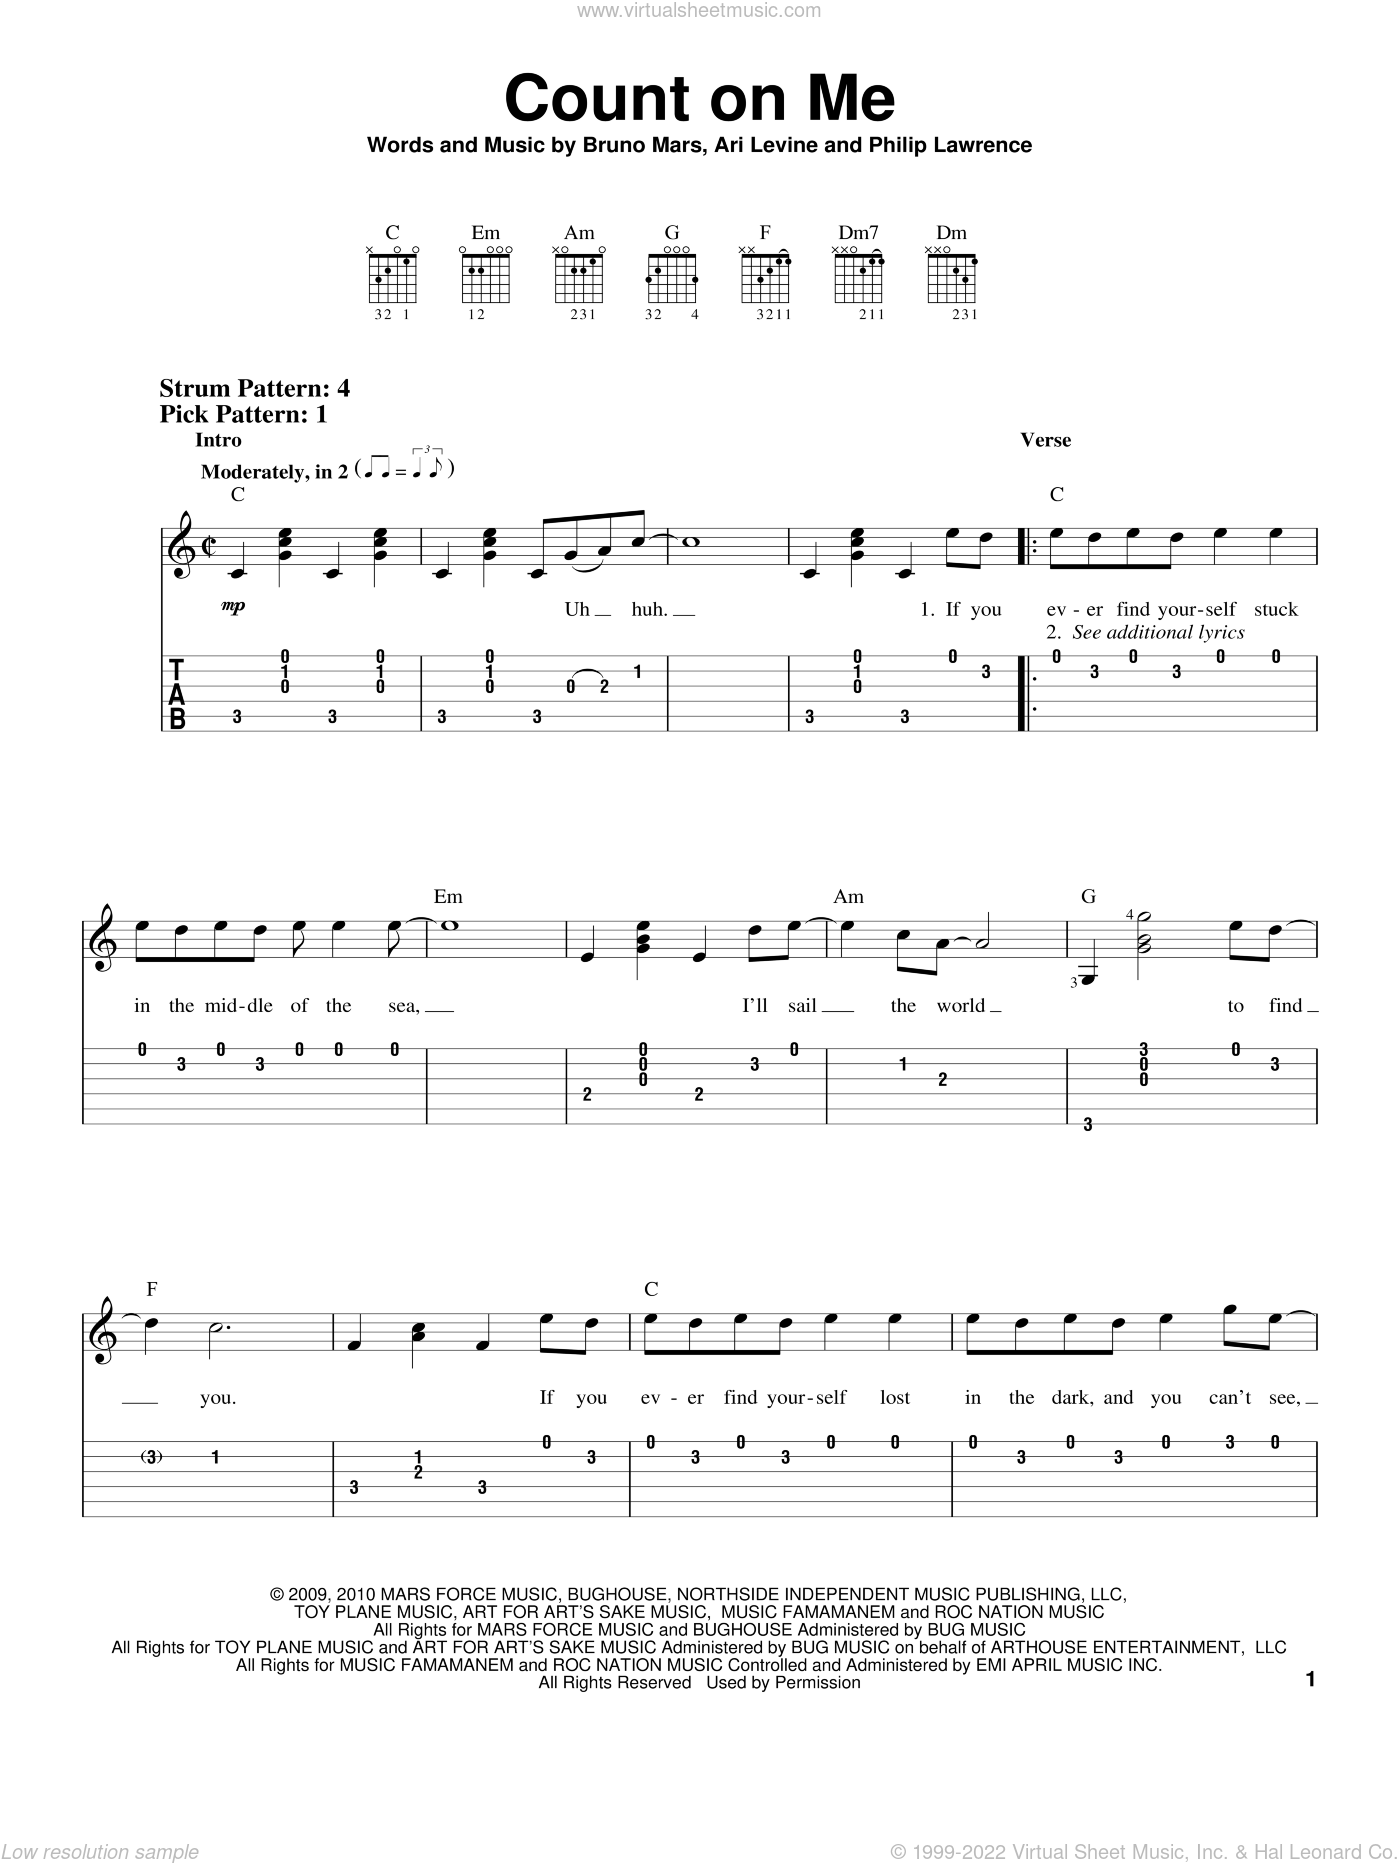 Fastest You Can Count On Me Lyrics And Chords